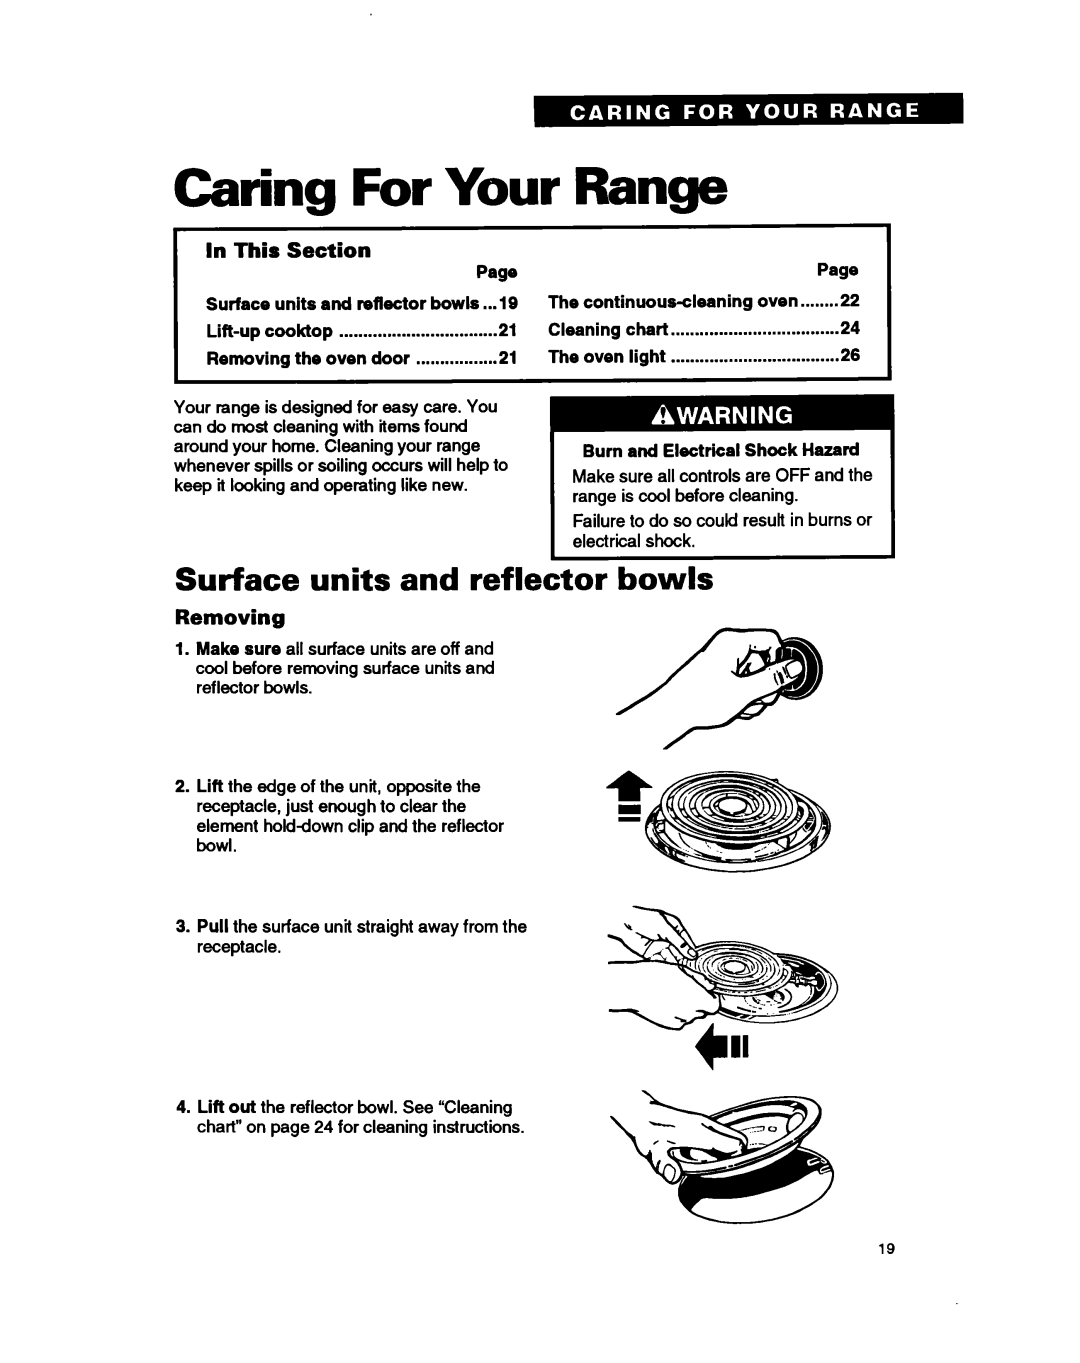 Whirlpool FEP330B, FEC330B Caring For Your Range, Surface units and reflector bowls, In This Section, Removing, Page 